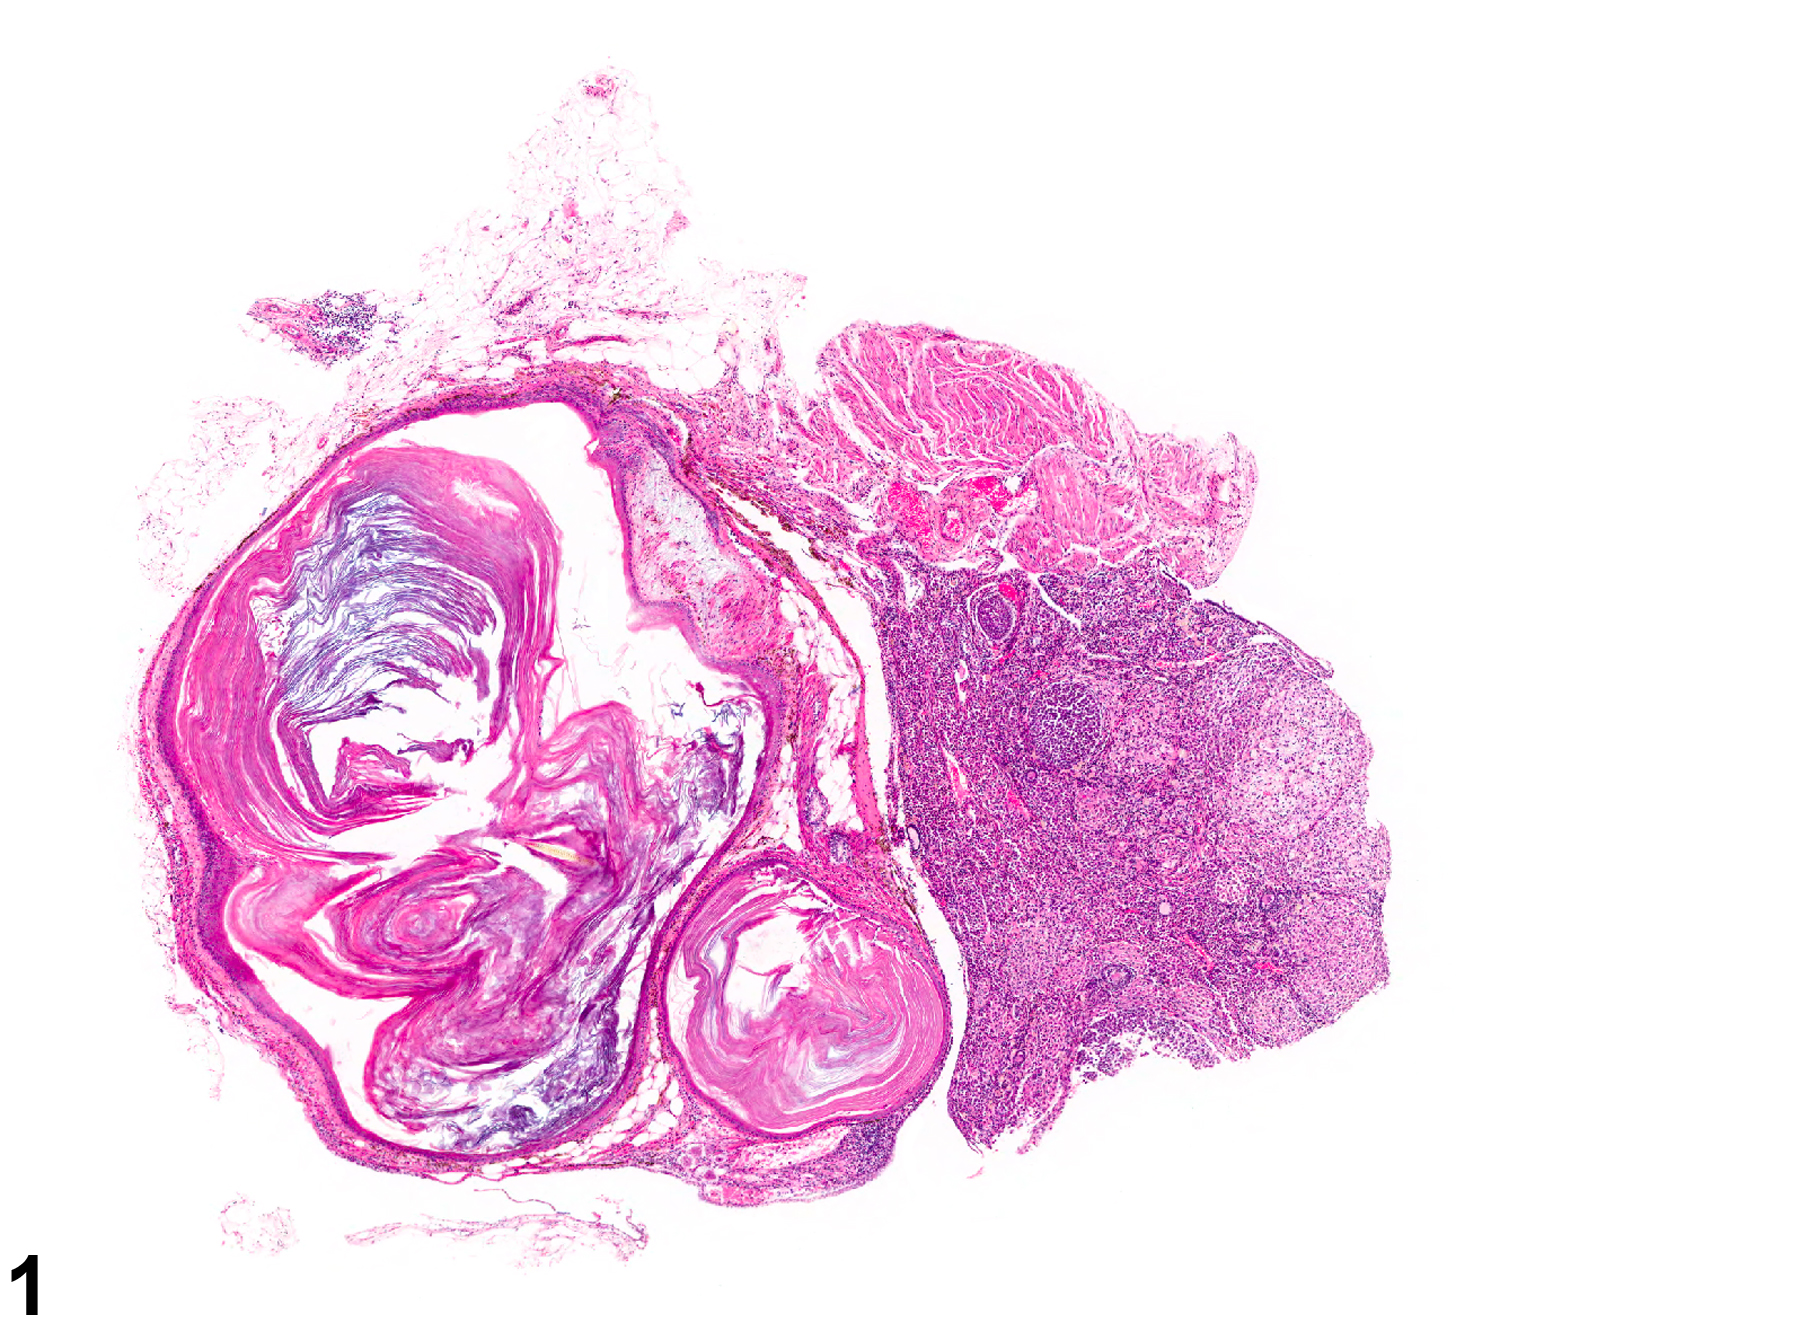 Image of cyst, epithelial in the ovary from a female B6C3F1 mouse in a chronic study